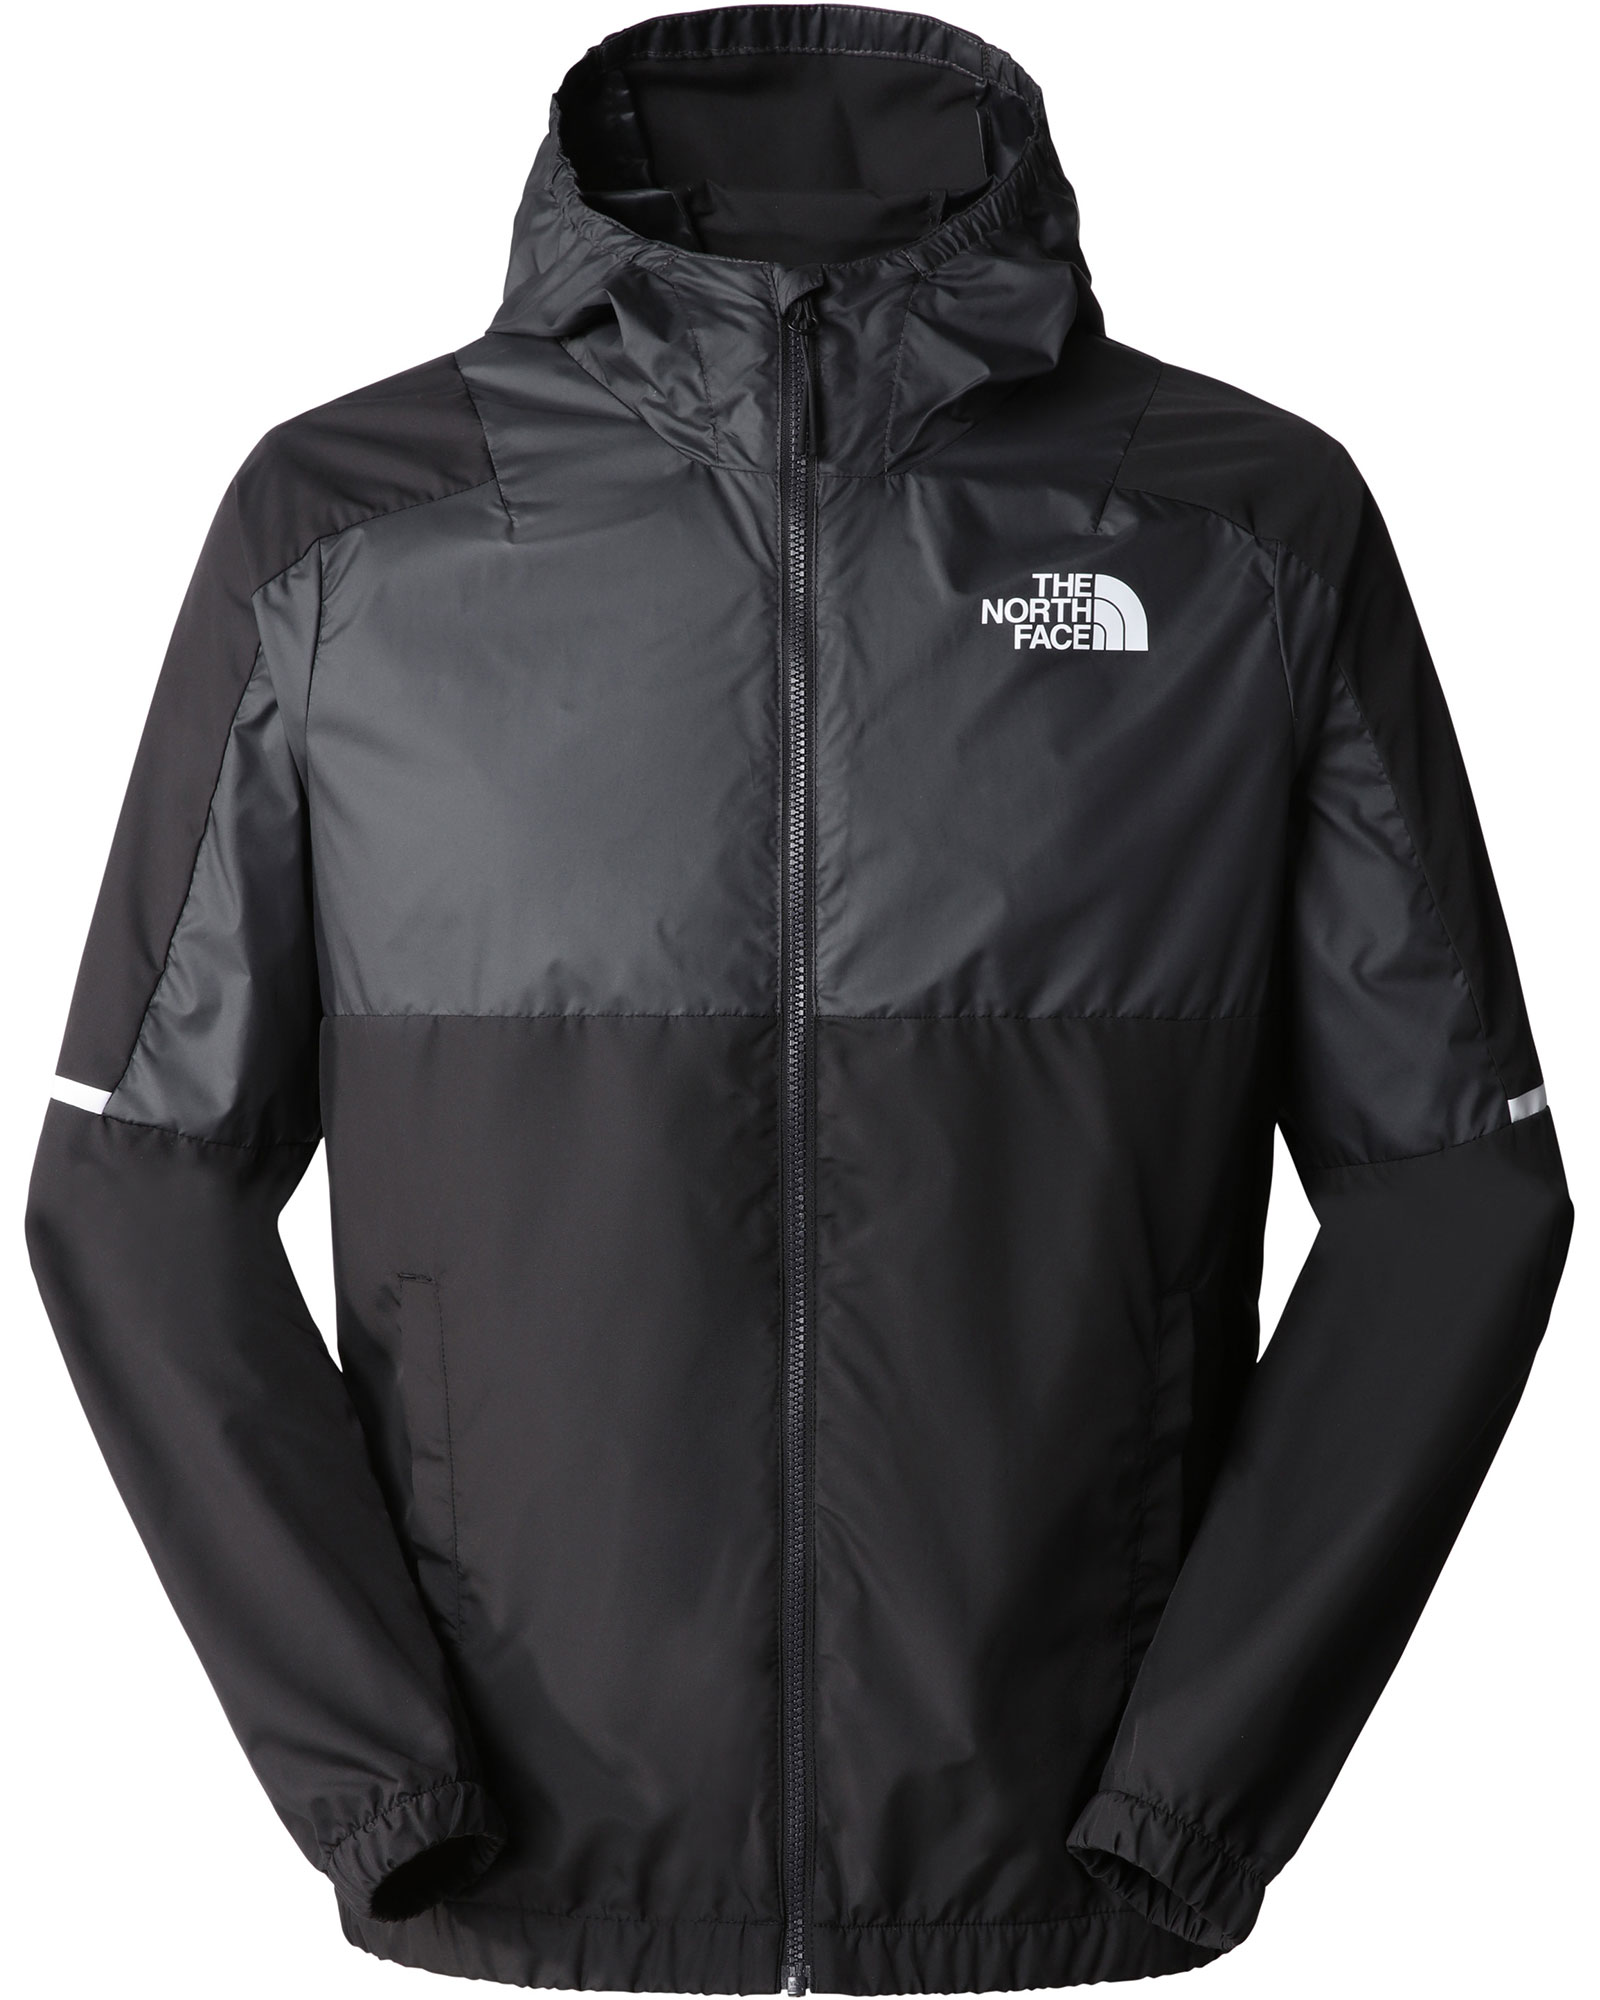 The North Face Mens Ma Wind Full Zip Jacket